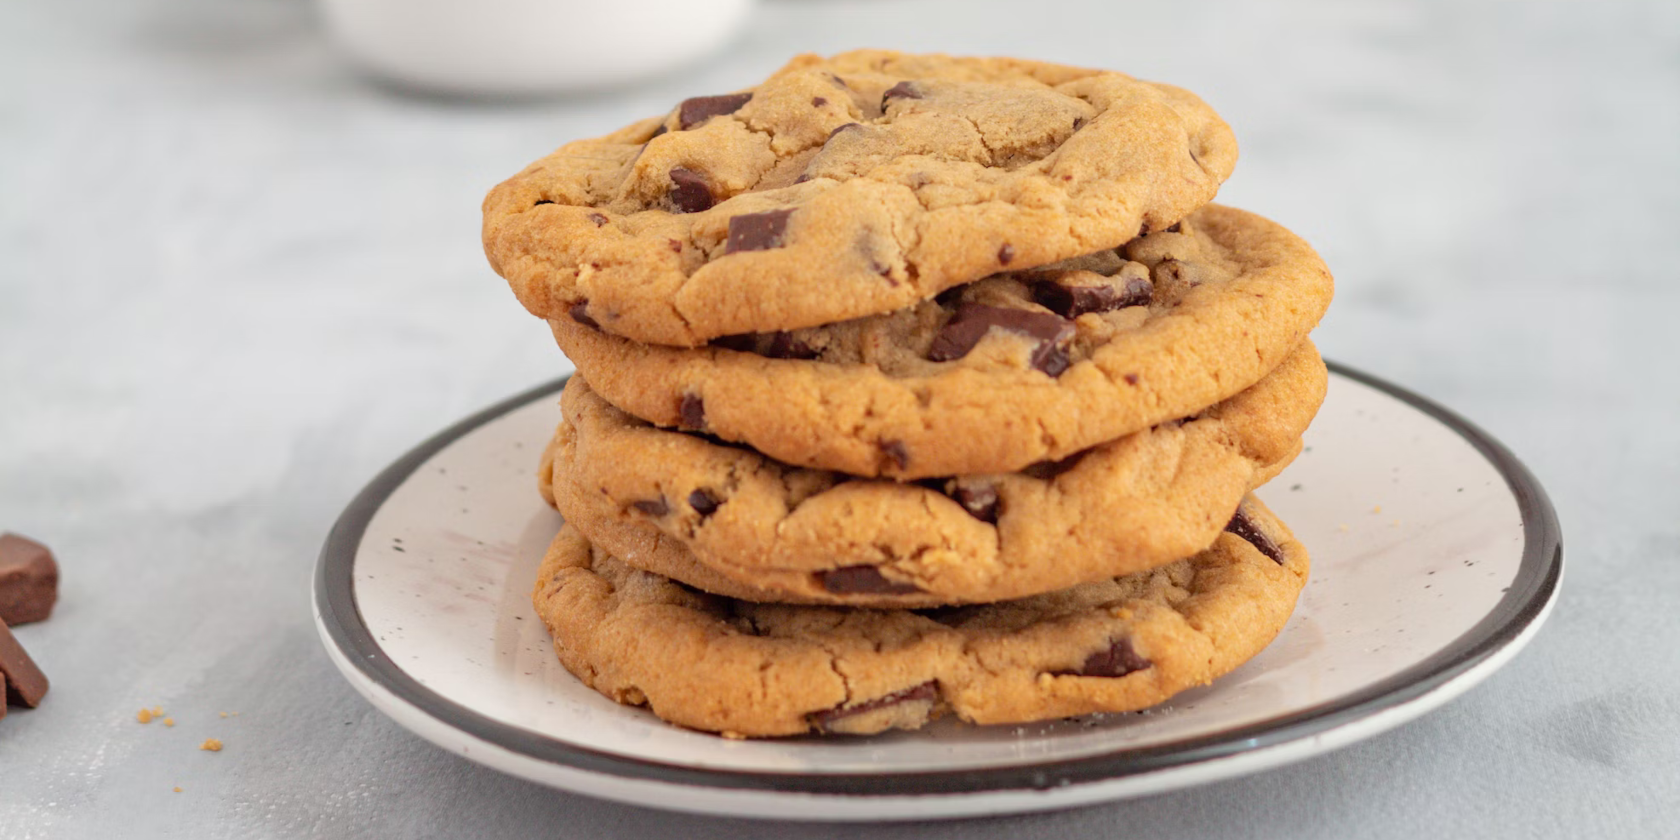 A stack of chocolate cookies on a plate